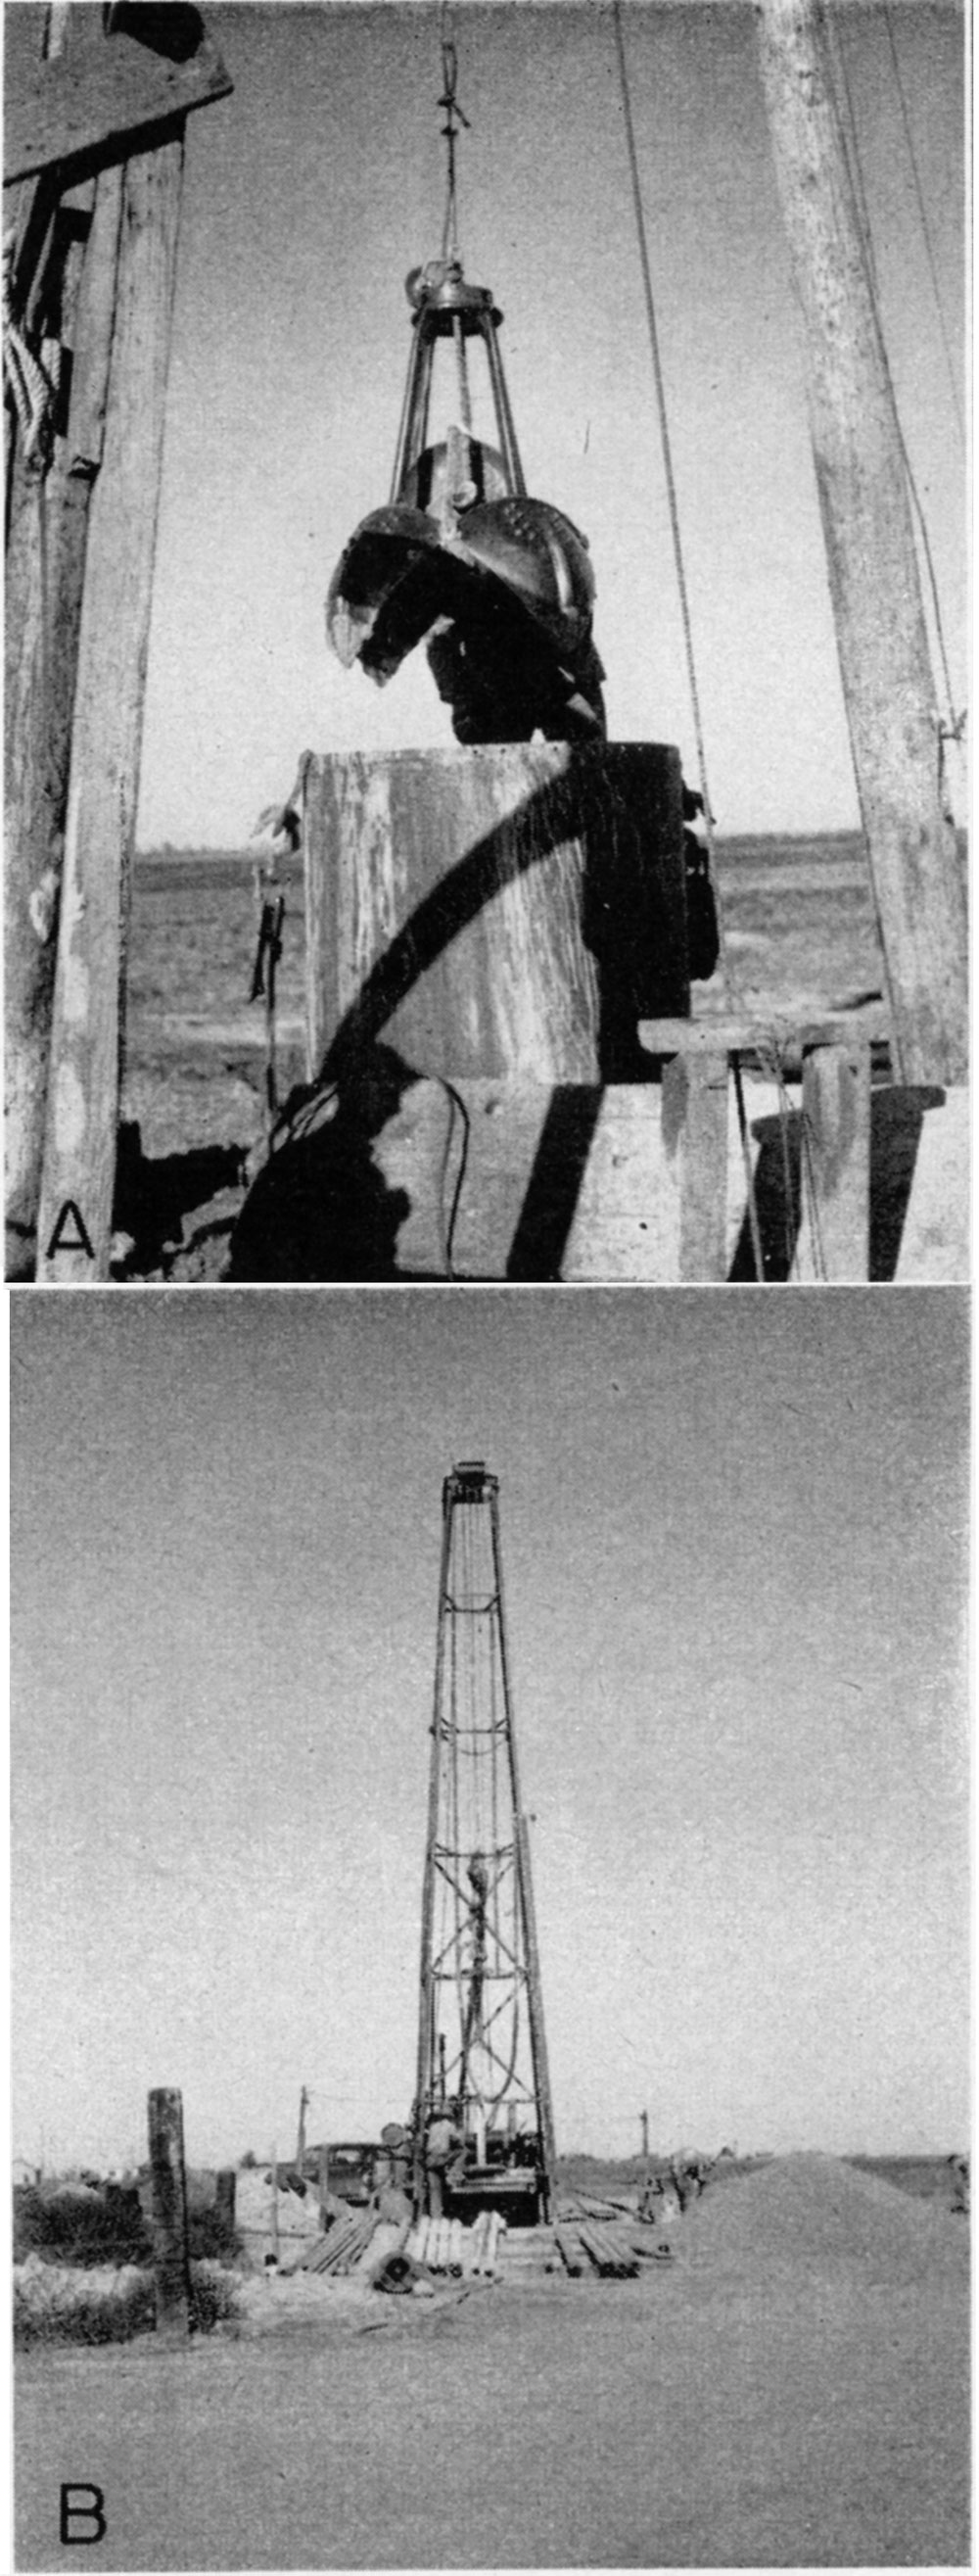 black and white photos; upper shows open bucket ready to be lowered into hole; lower shows full view of rotary drill rig